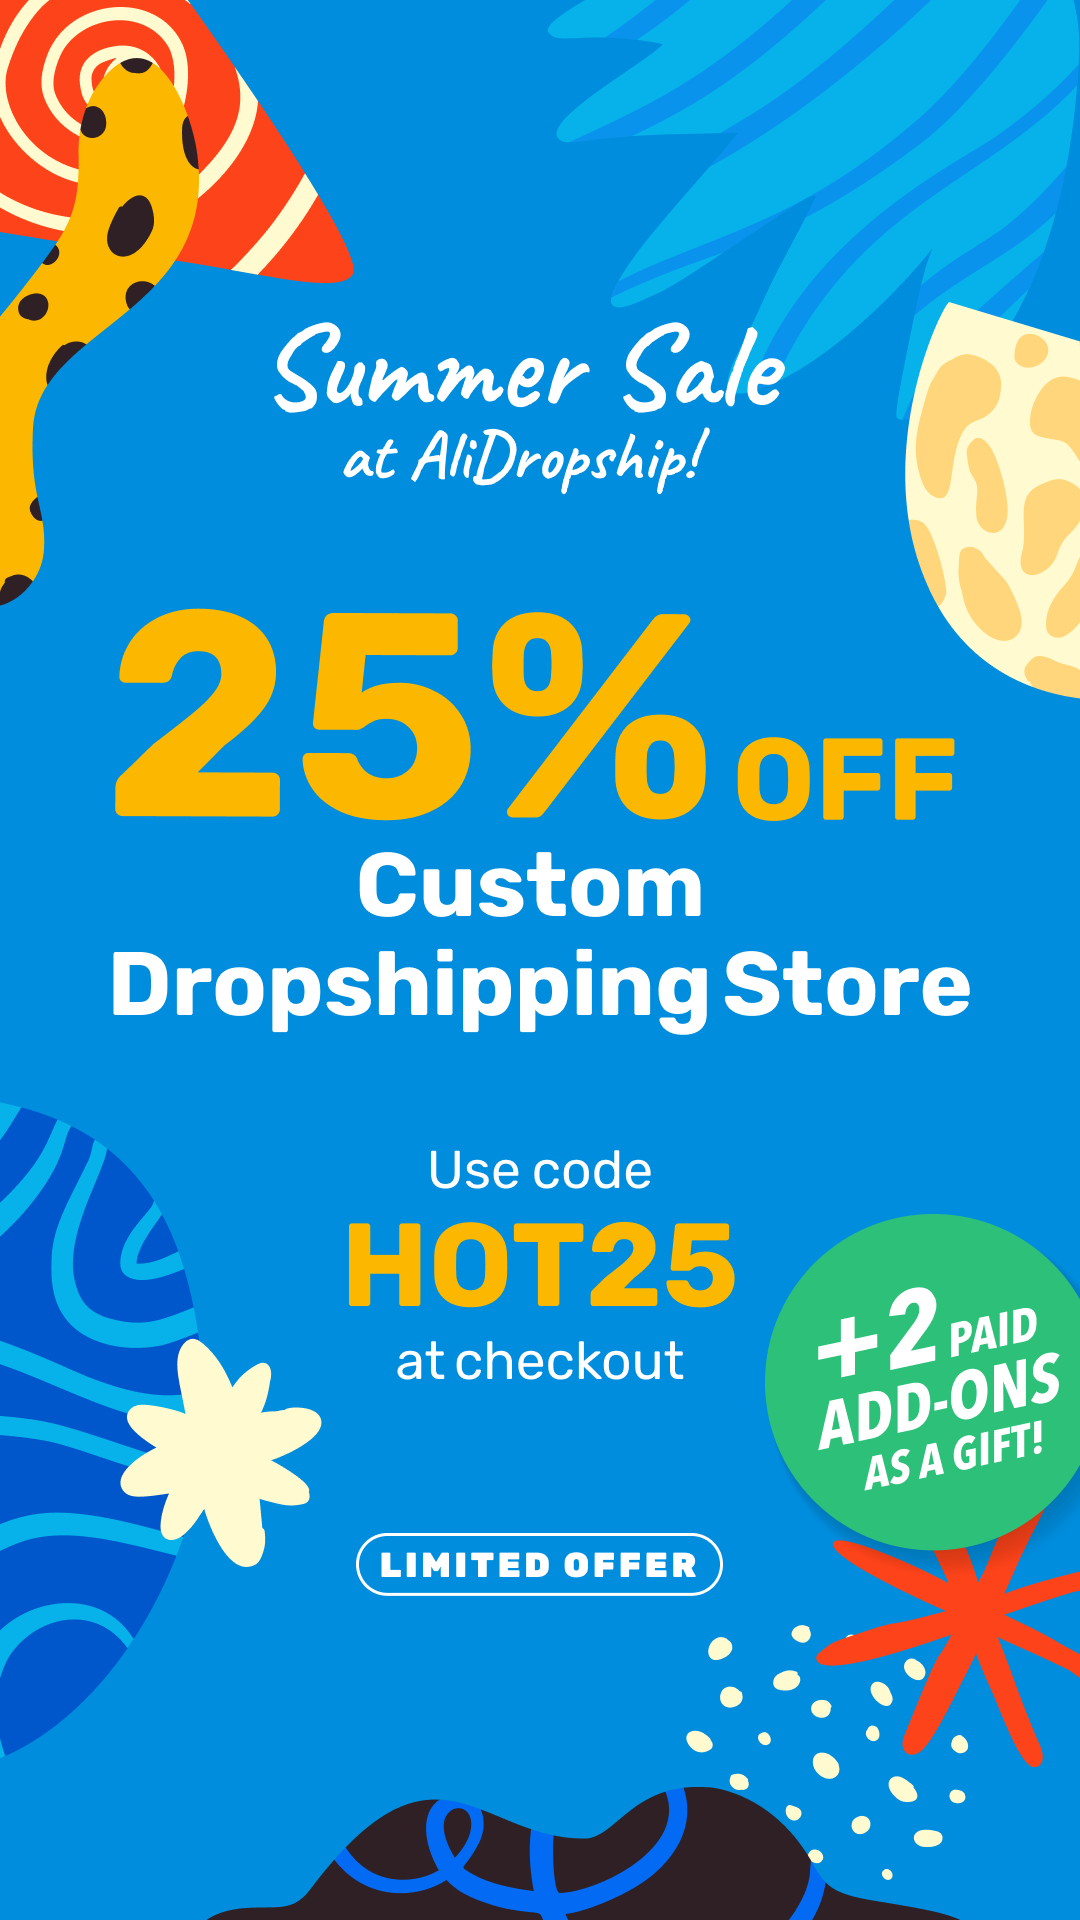 Summer Sale is ON! Up to 35% OFF AliDropship solutions